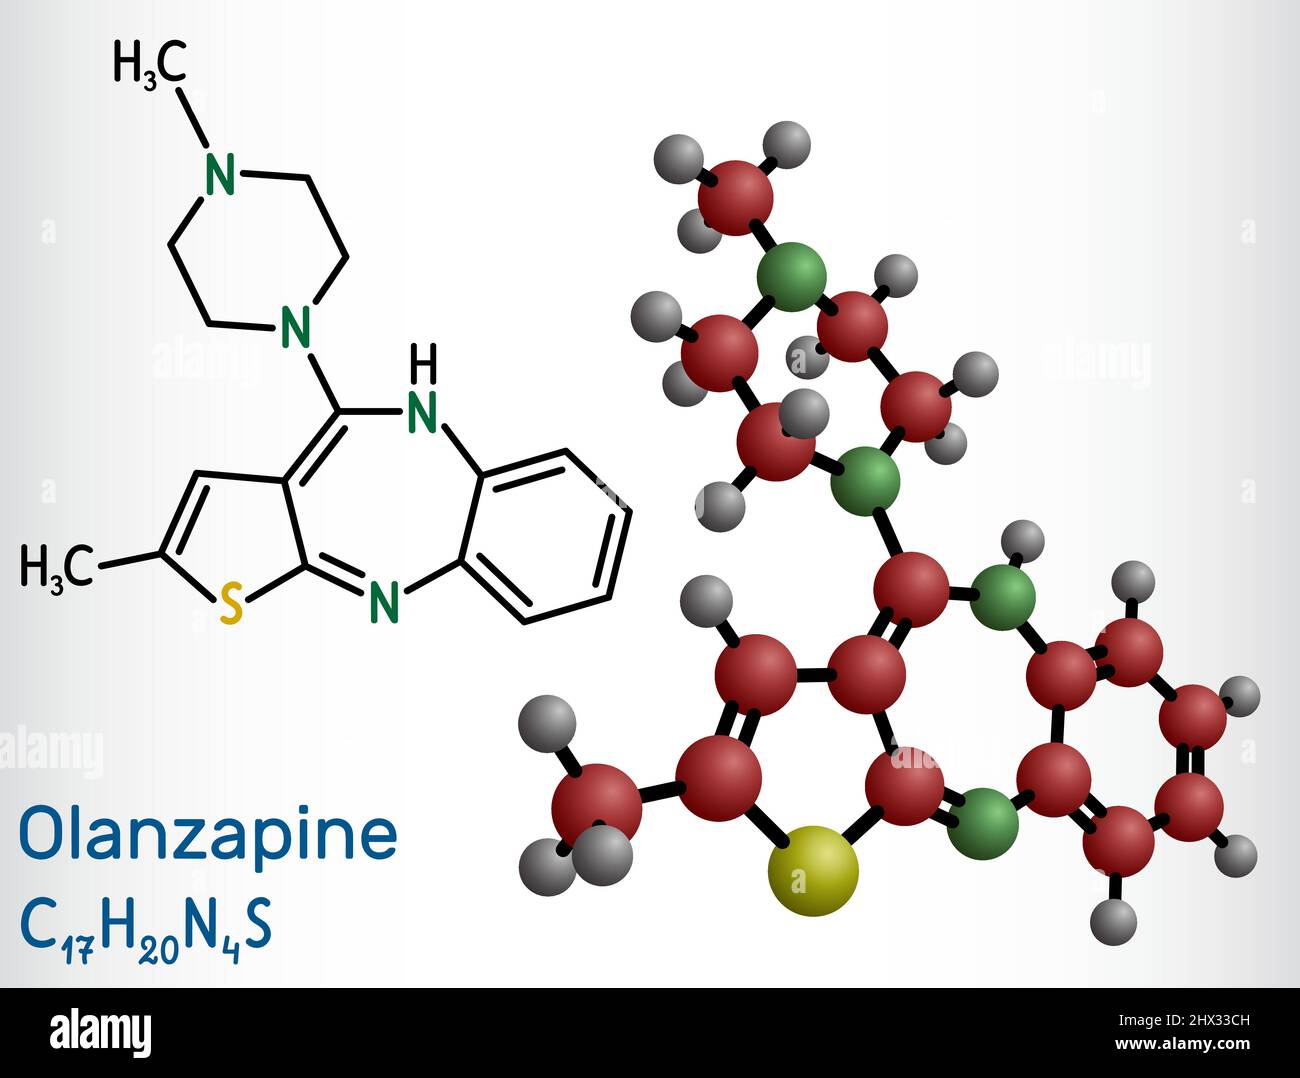 Olanzapine molecule. It is atypical antipsychotic drug for the treatment of schizophrenia, bipolar disorder. Structural chemical formula and molecule Stock Vector